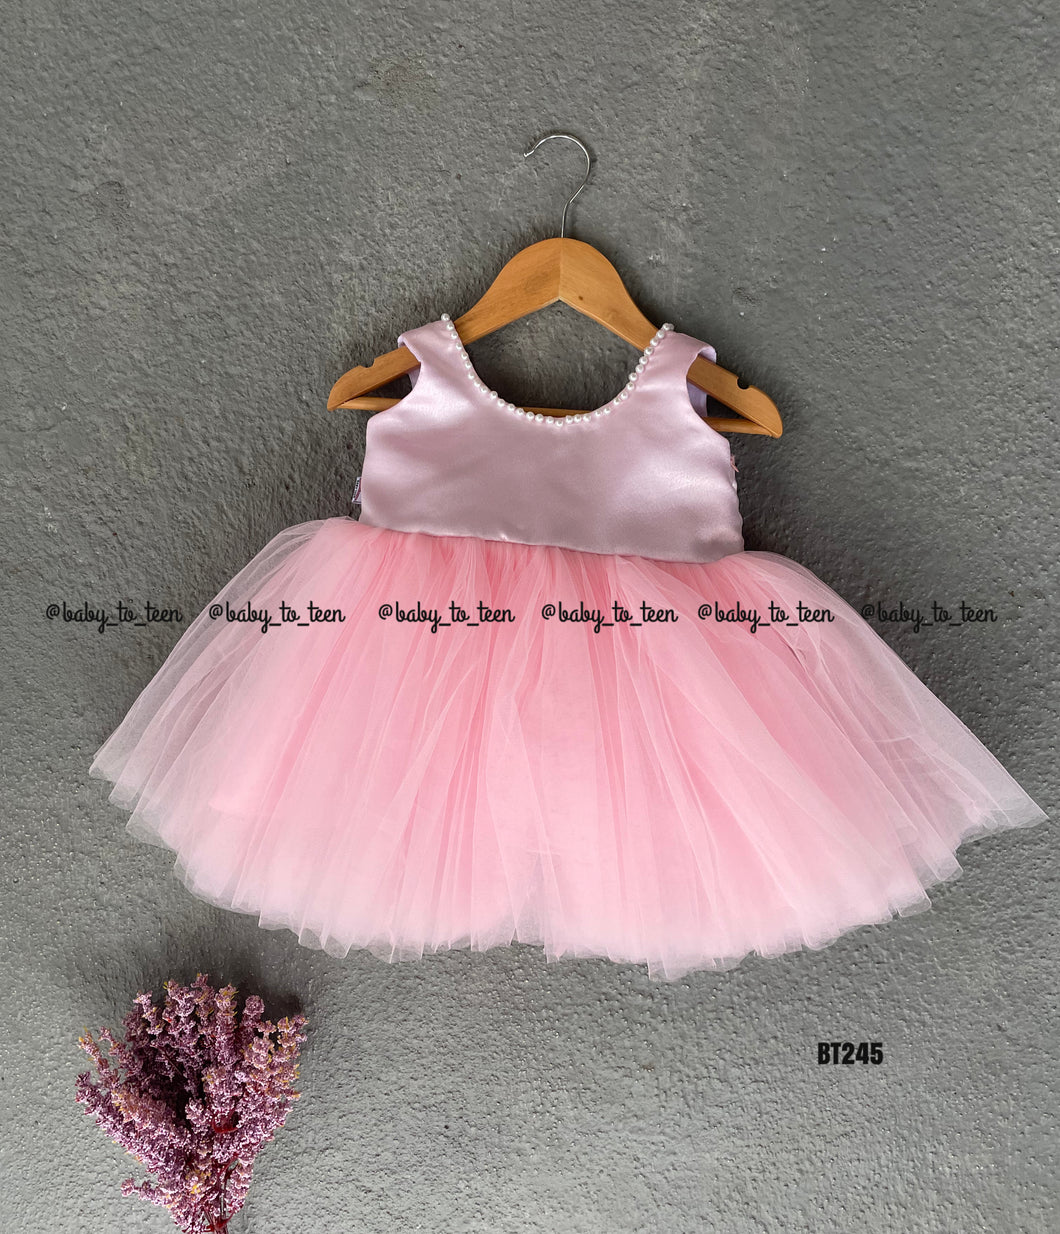 BT245 Pink Pearl Princess Dress - Every Moment is Magical